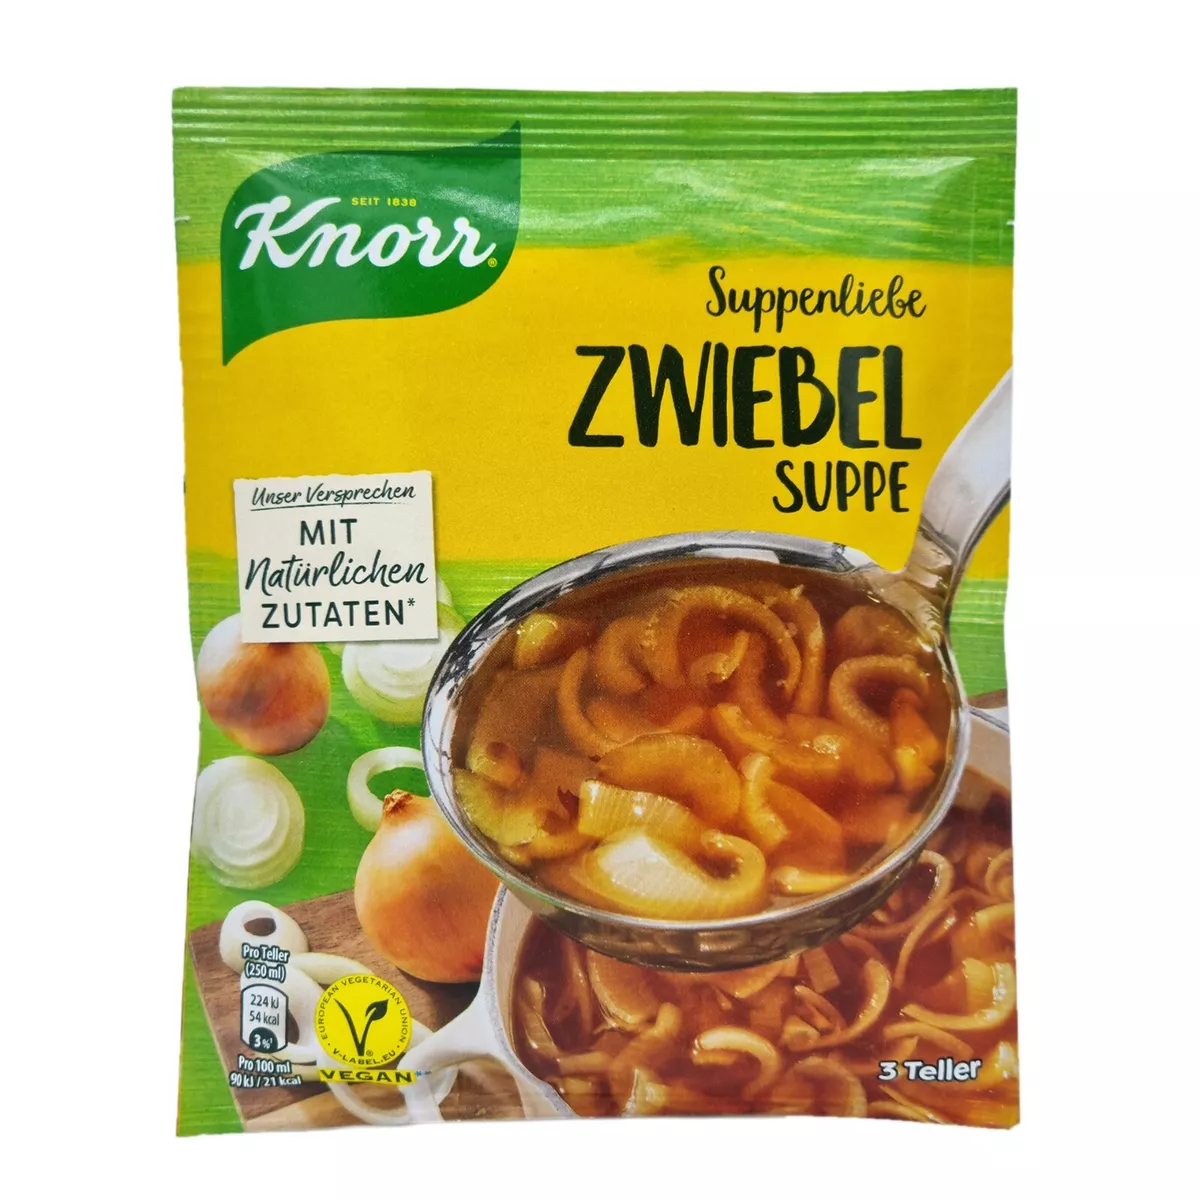 SHIPPING Suppe ✈TRACKED Suppenliebe eBay 🍲 Zwiebel Knorr soup 8x | onion